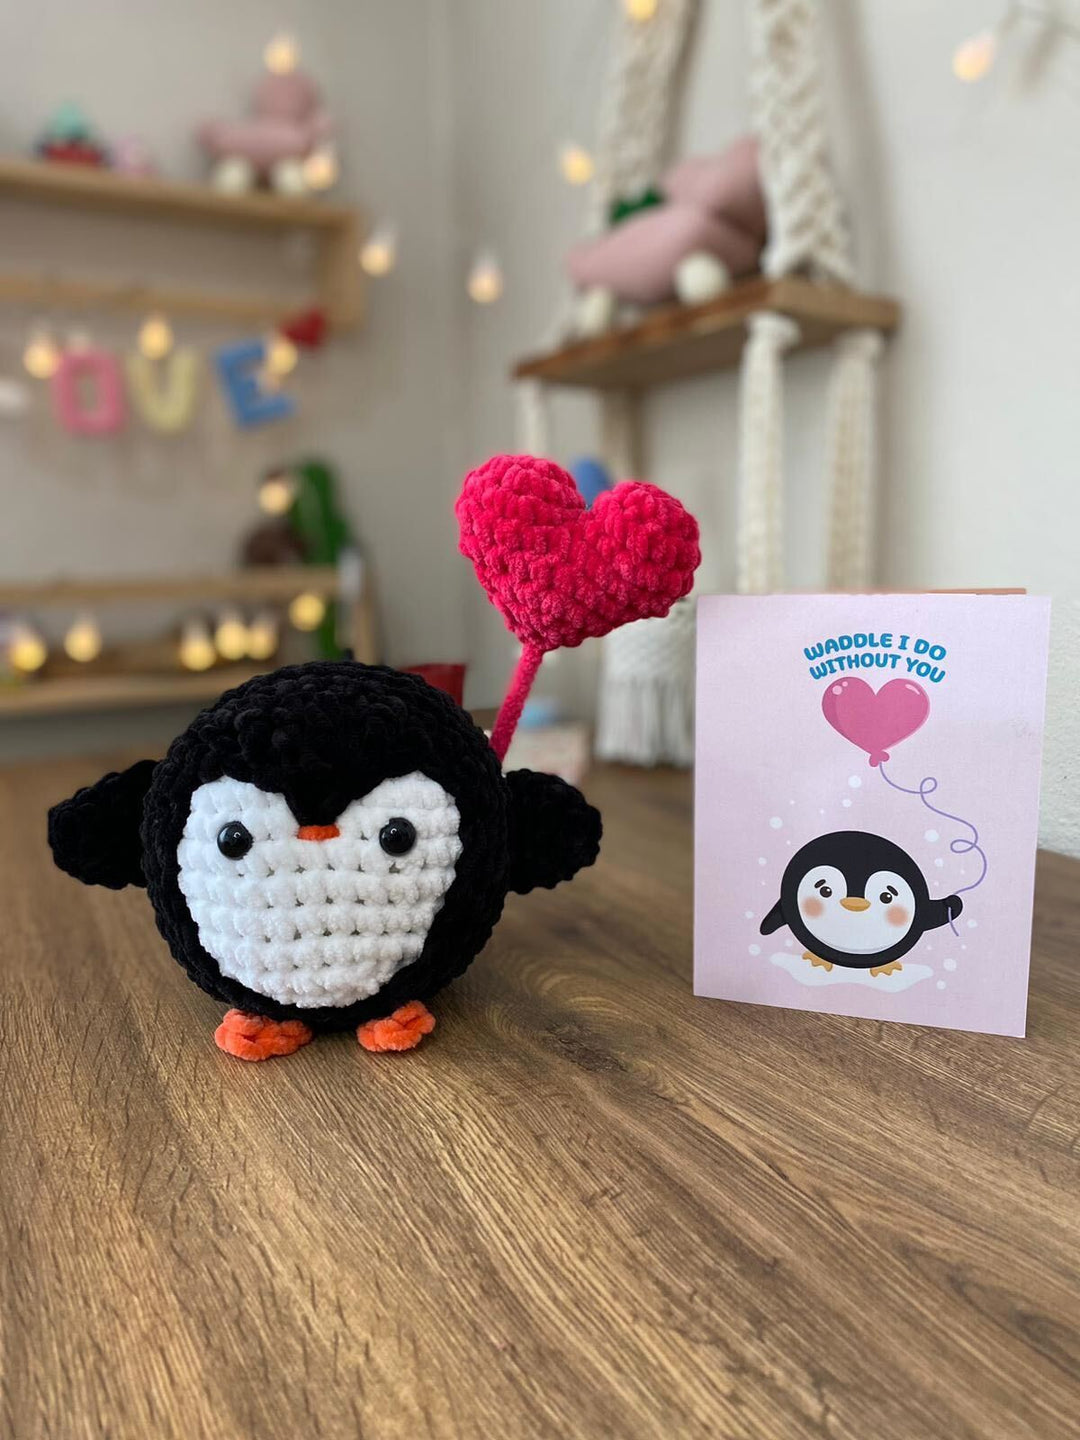 Penguin Crochet Pattern & Matching Card: "Thinking Of You"